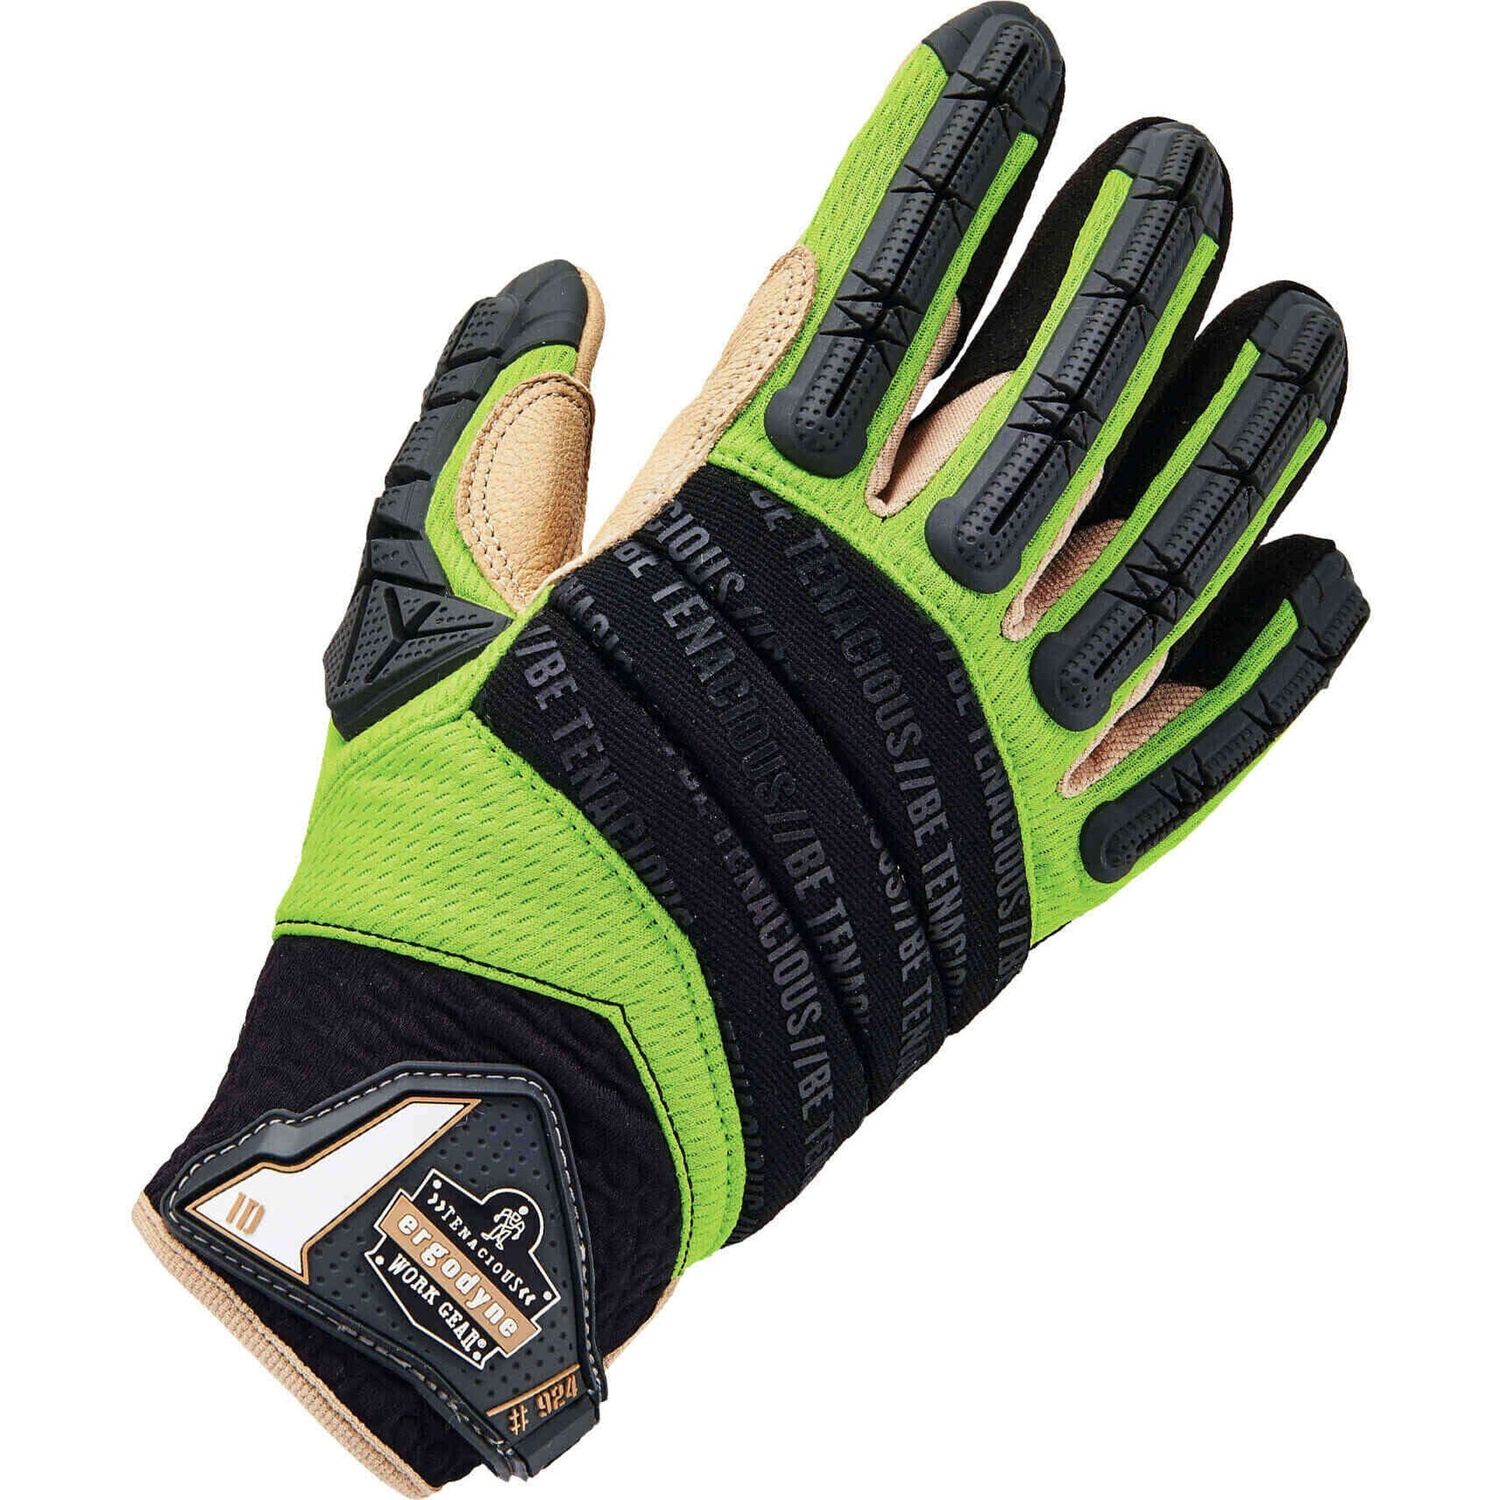 924LTR Leather-Reinforced Hybrid DIR Gloves XXL Size, Neoprene Cuff, Foam Knuckle Pad, Thermoplastic Rubber (TPR) Finger, Mesh, Leather, Lime